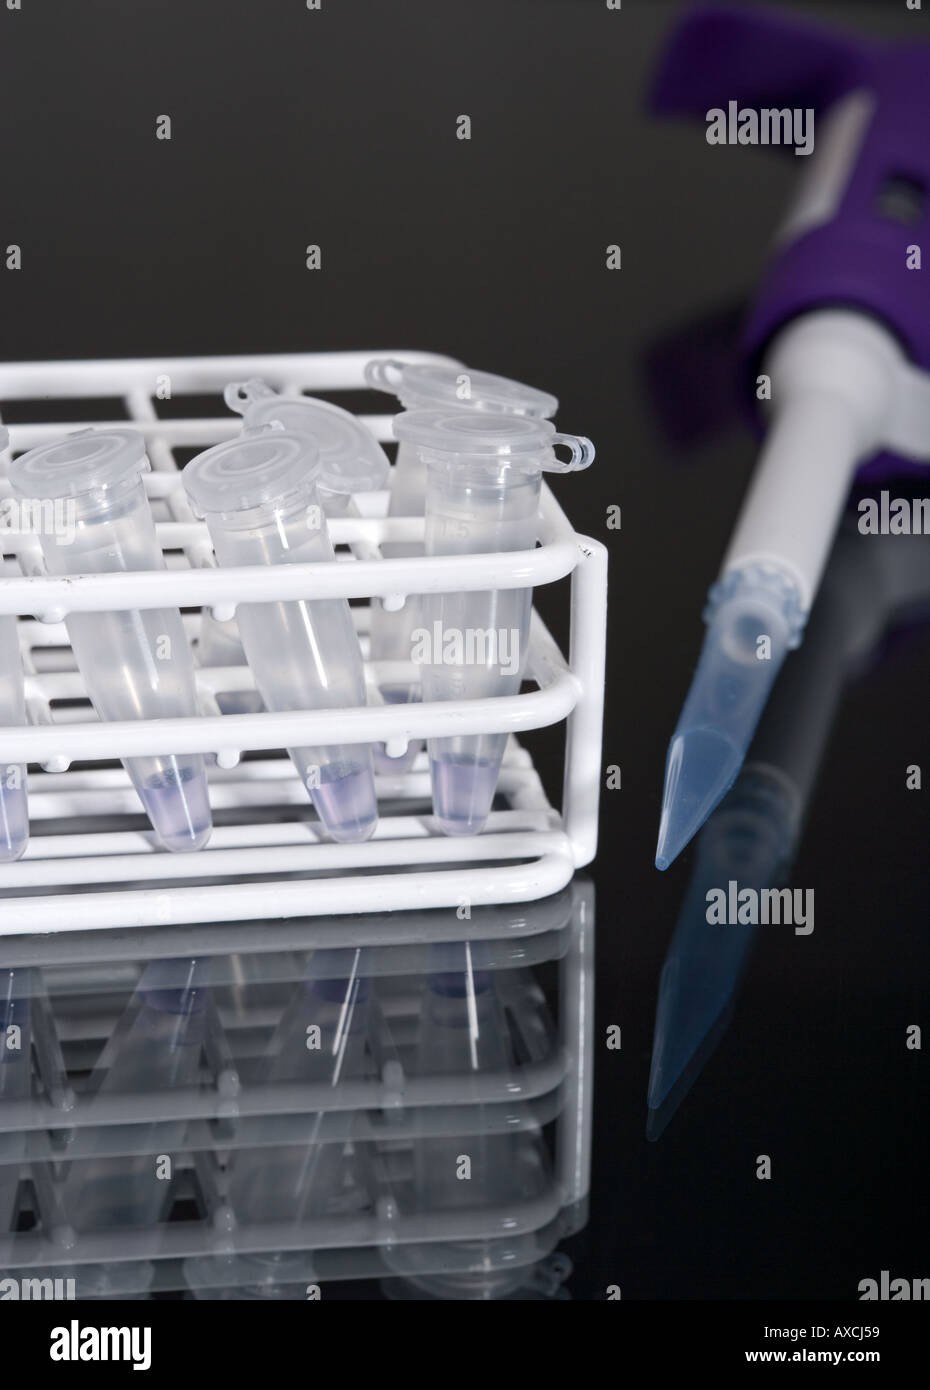 Test tubes and pipette on dark background Stock Photo